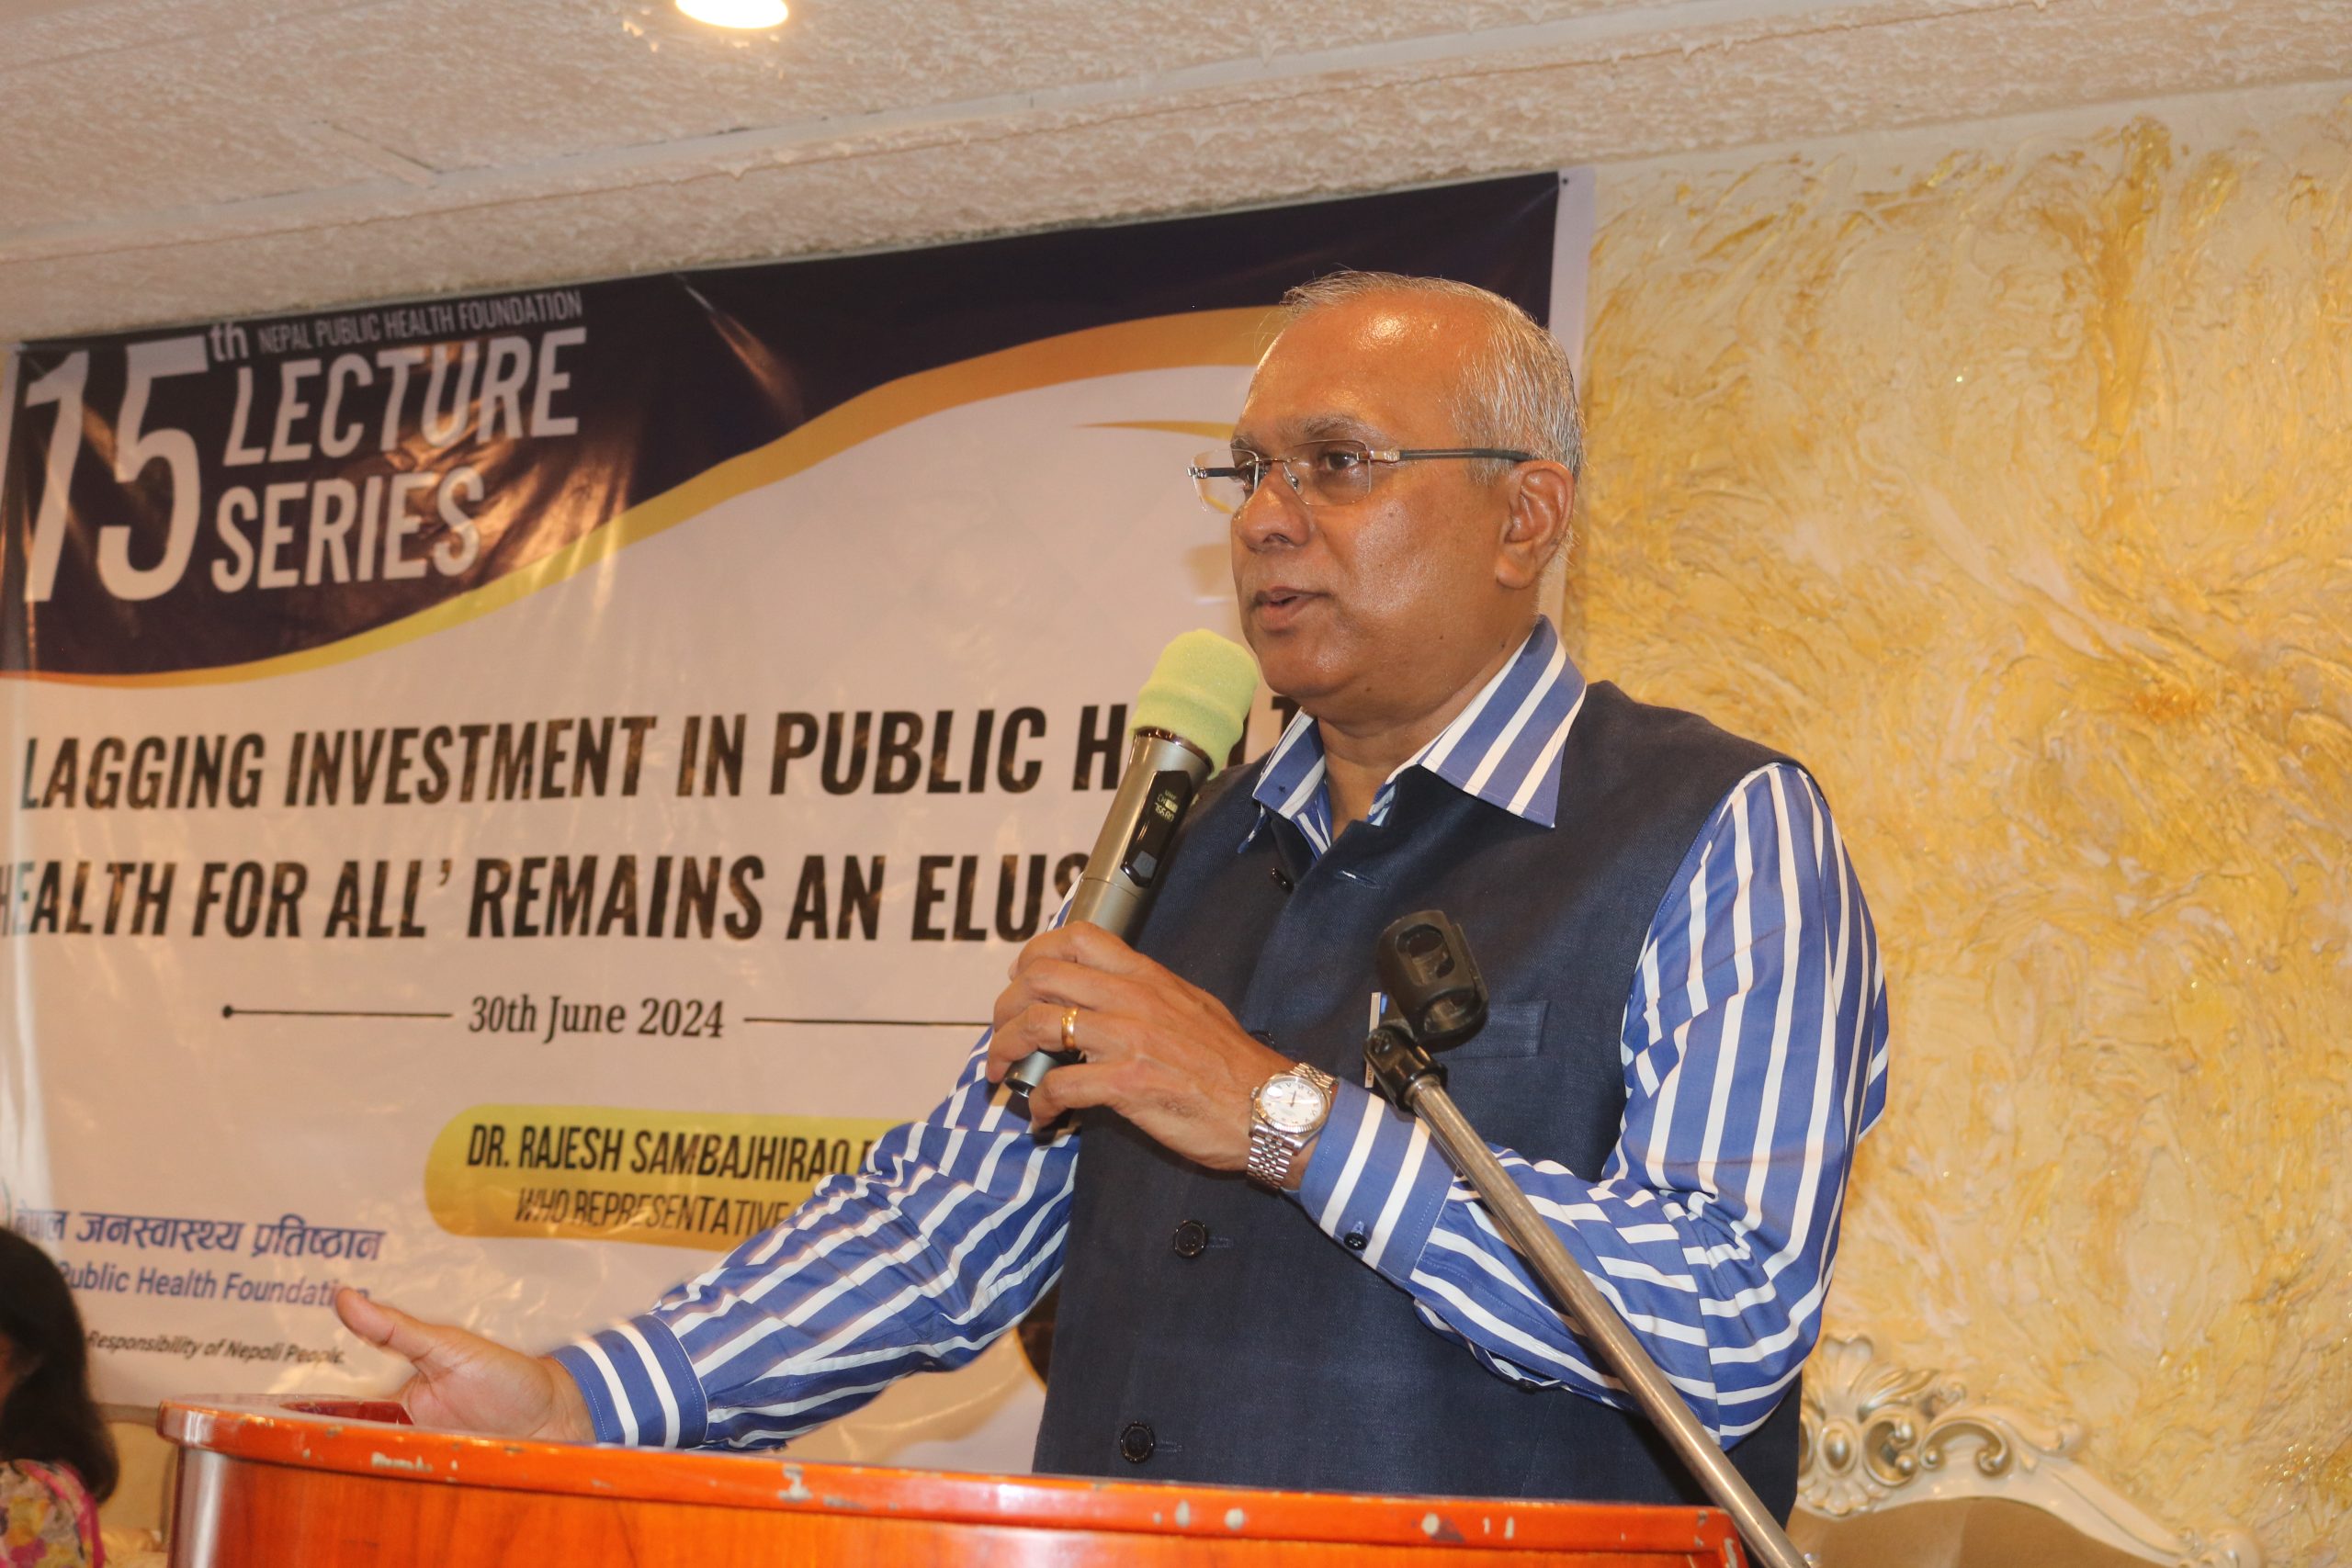 Nepal Public Health Foundation 15th Lecture Series